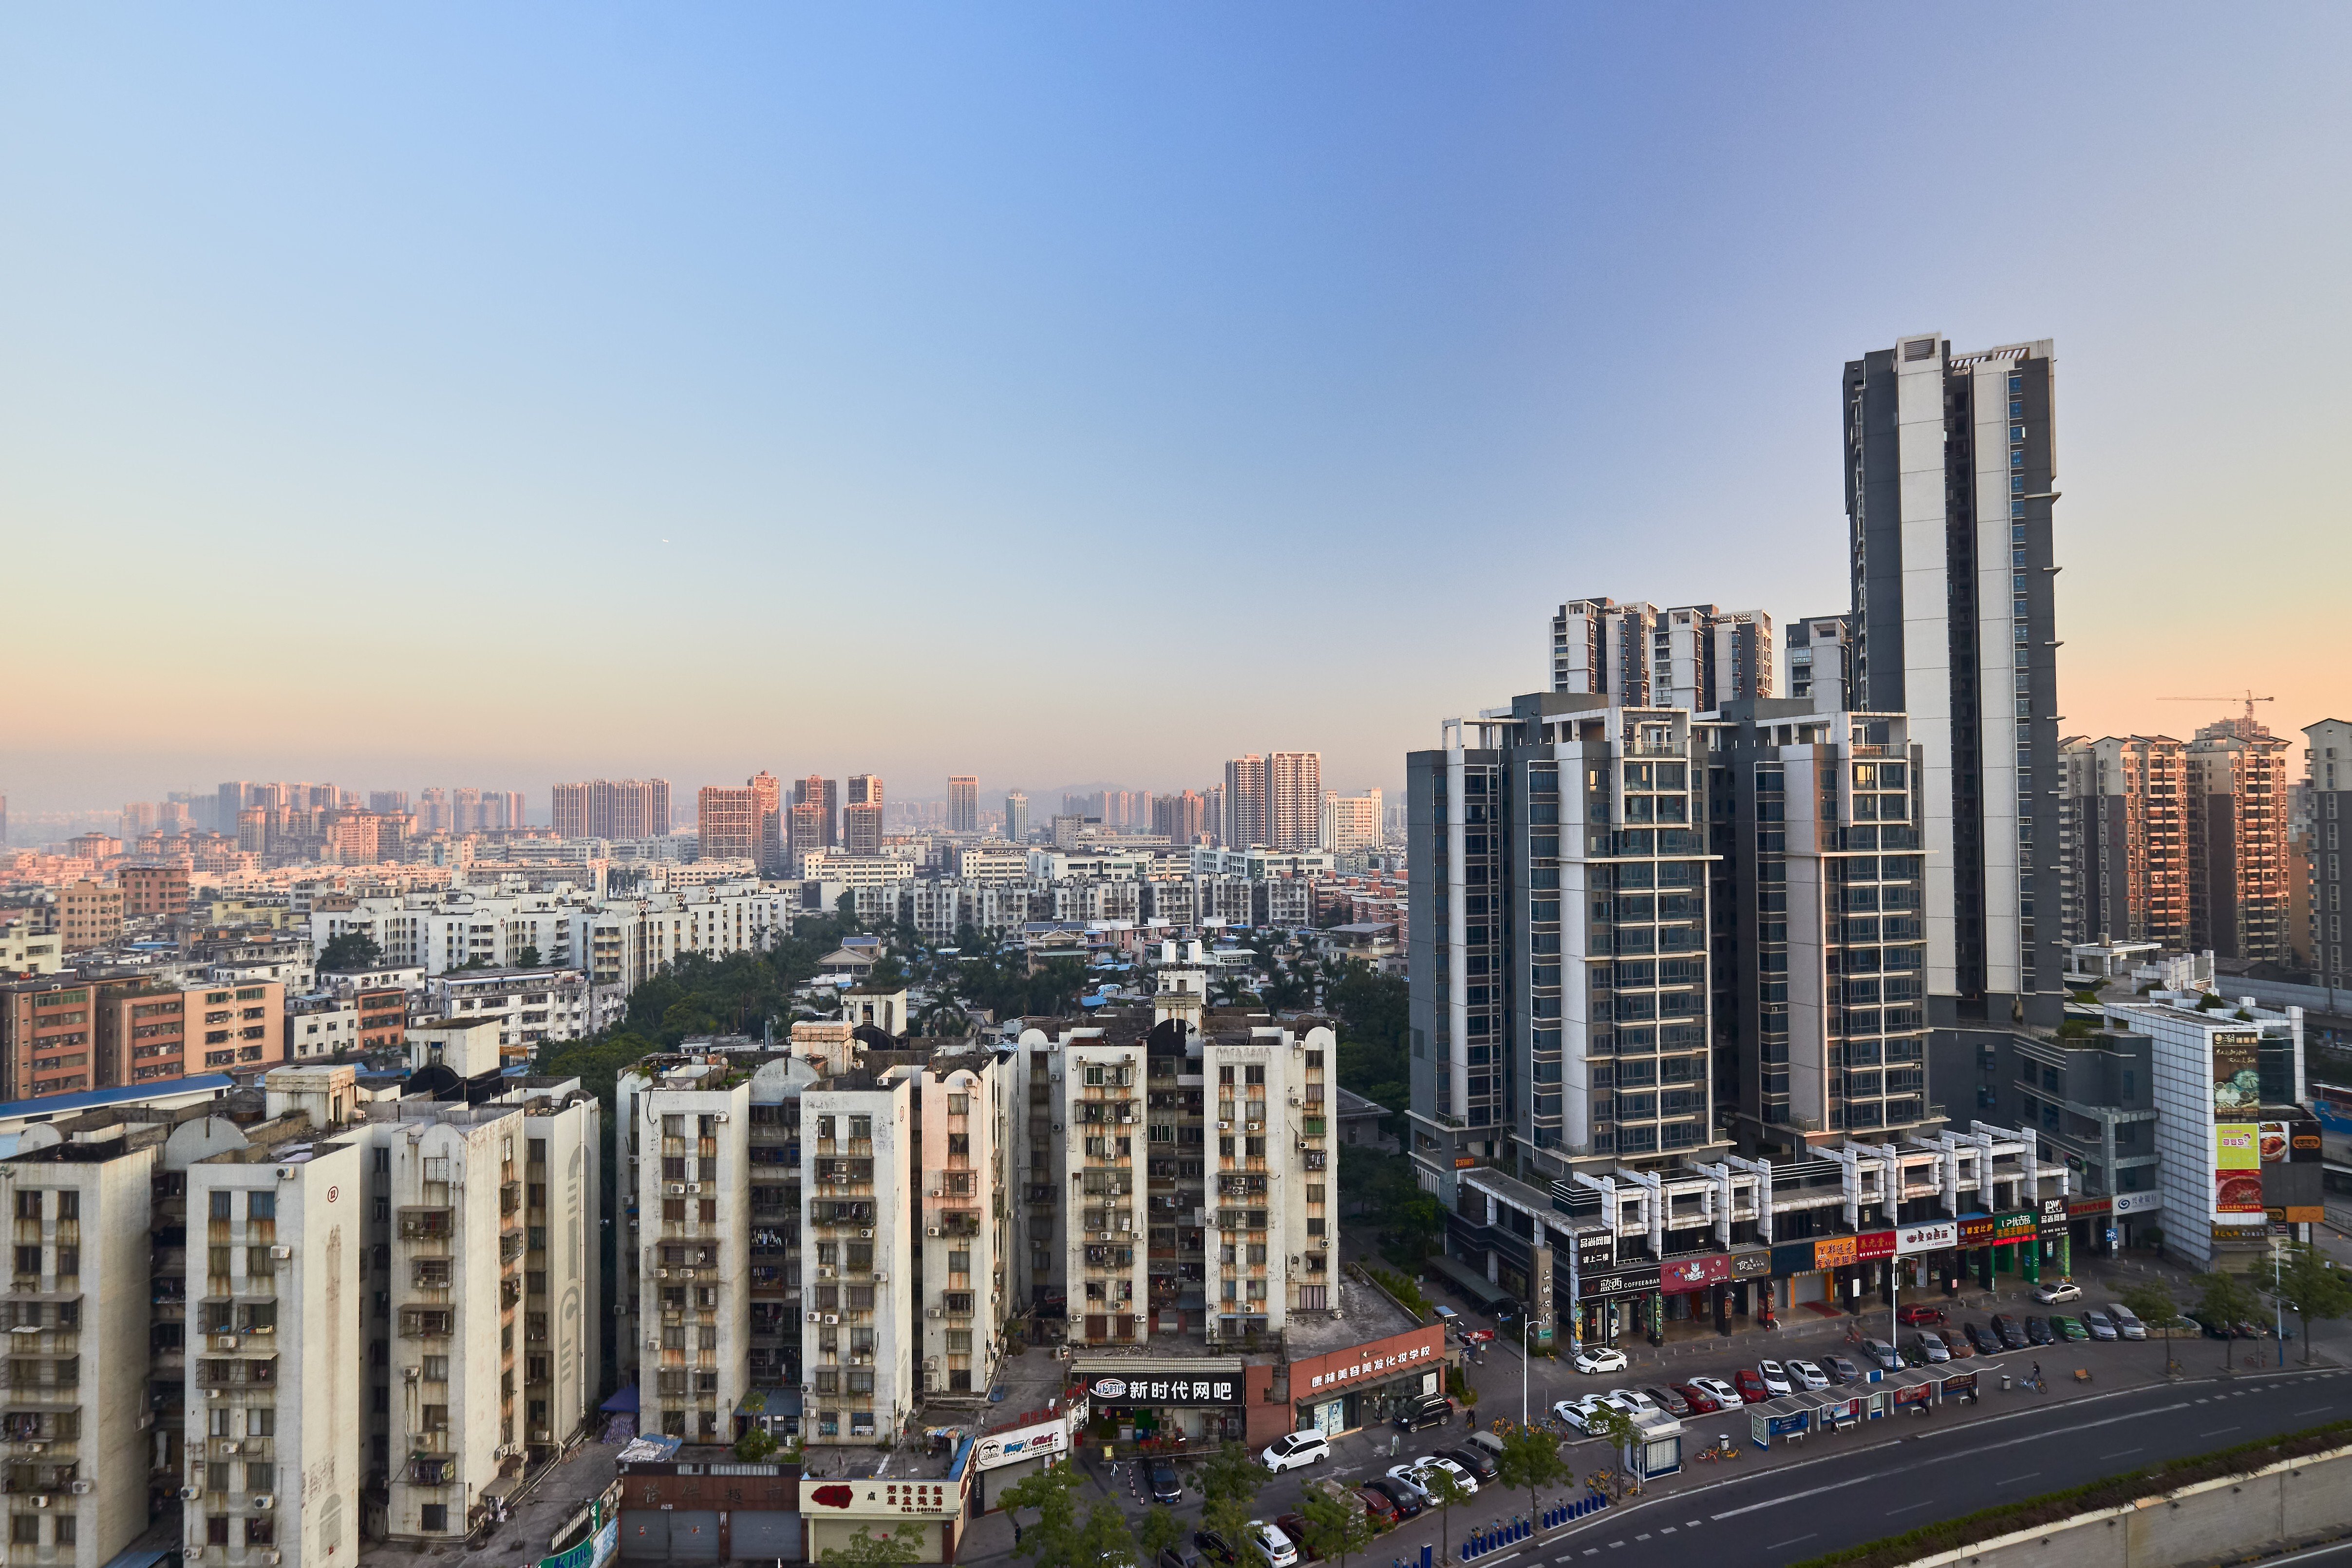 Zhuhai’s property market has the best potential upside over the next 12 months, according to the Hong Kong research firm Real Estate Foresight. Photo: Shutterstock